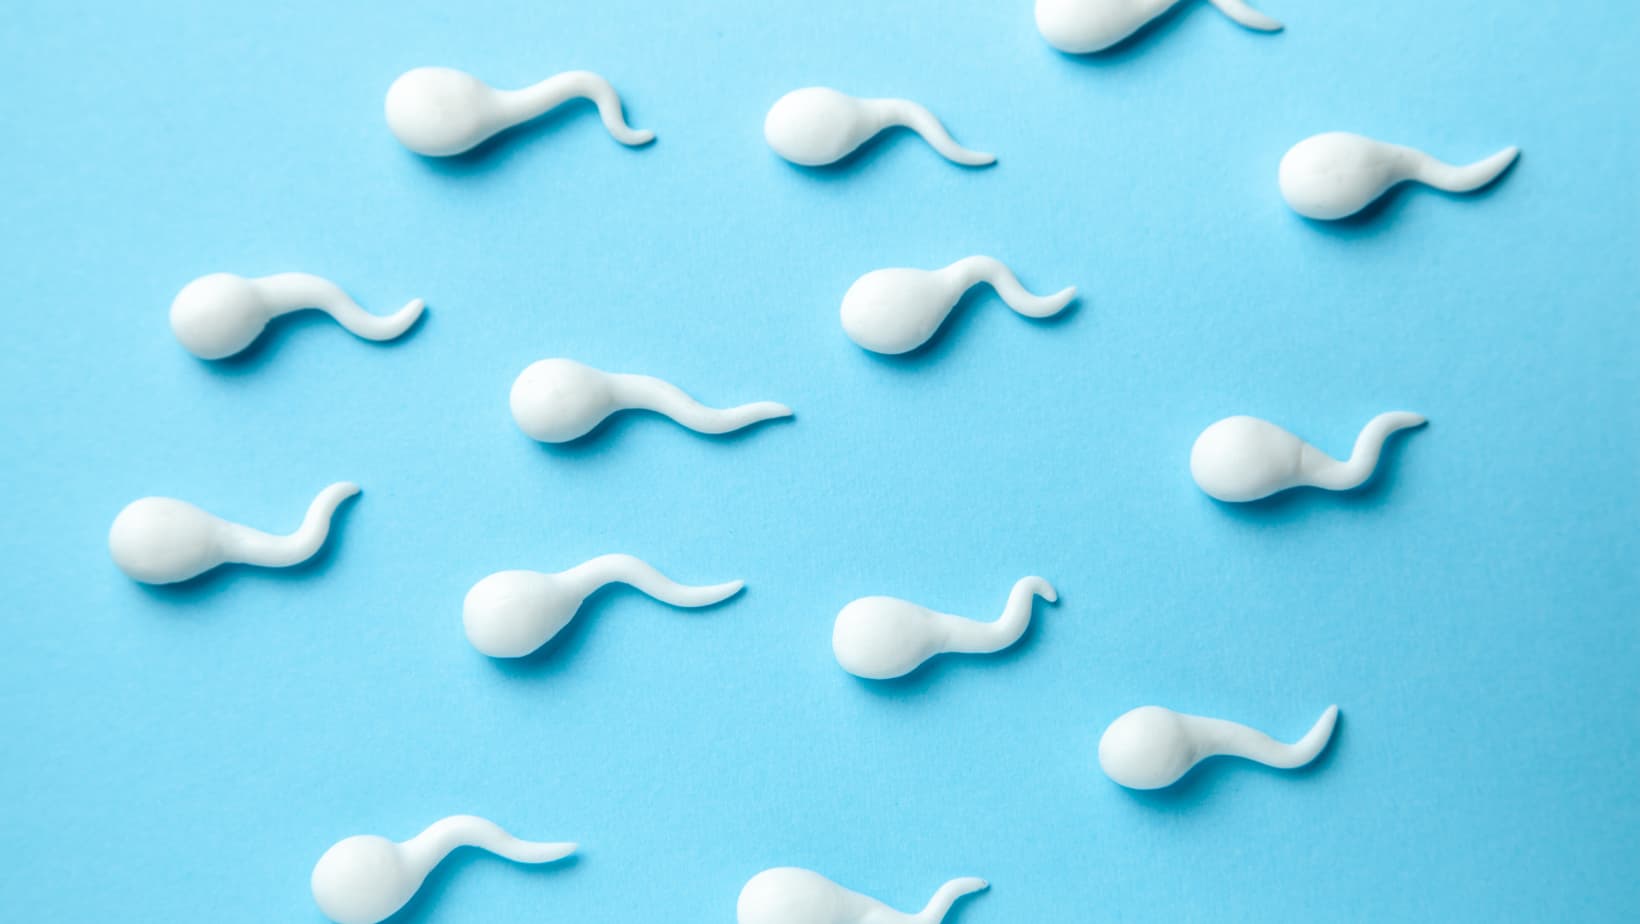 Male infertility due to sperm disorder, and hormonal imbalance.